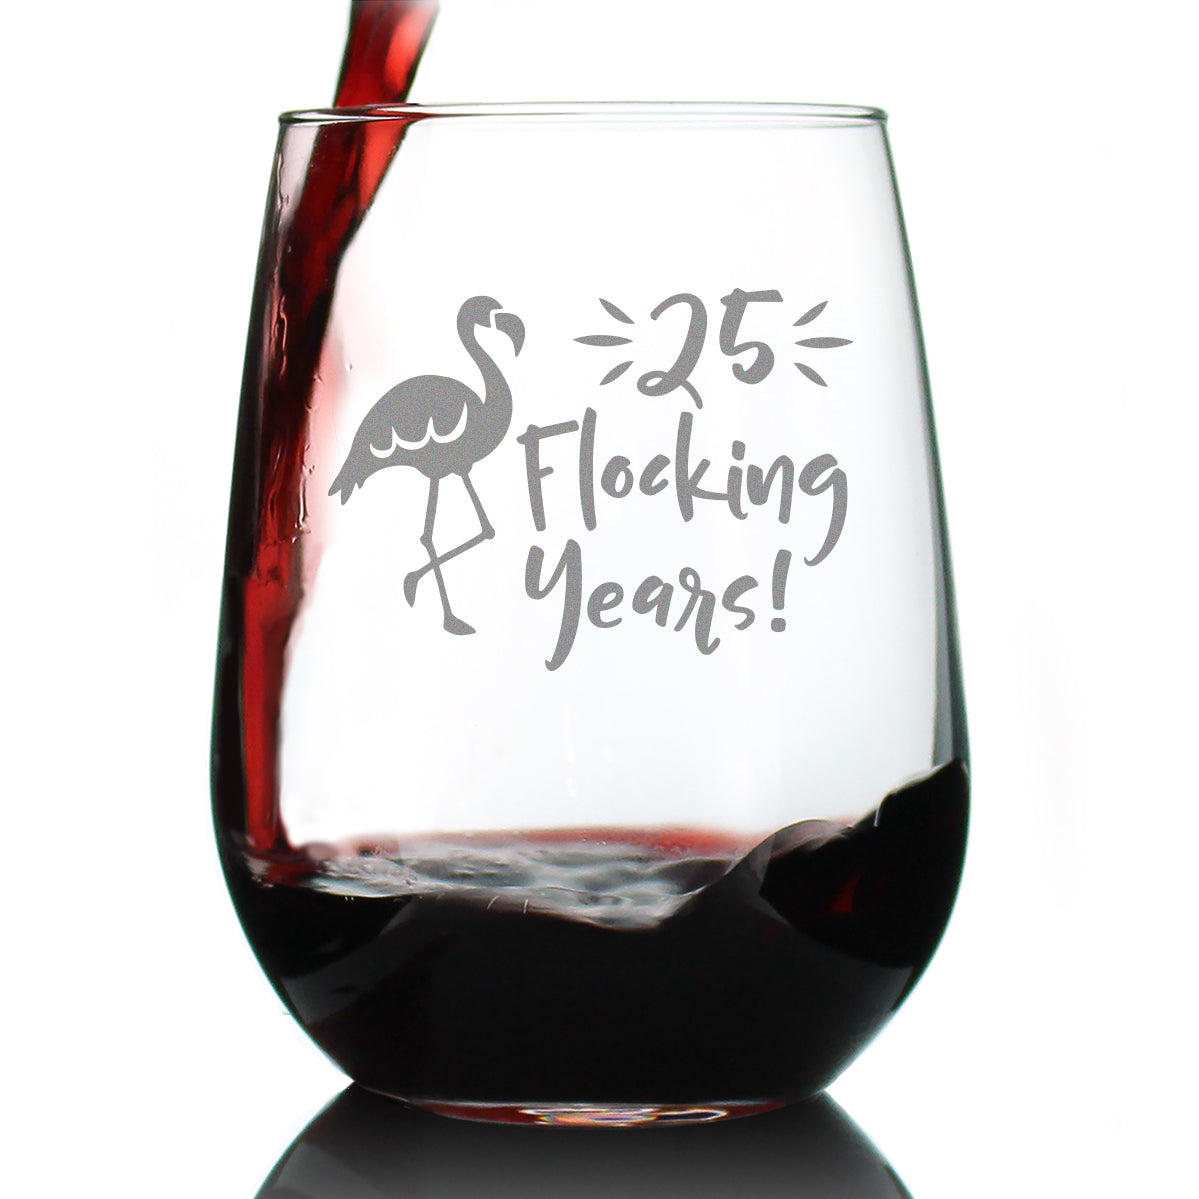 25 Flocking Years Cute Funny Flamingo Stemless Wine Glass, Large 17 Oz Size, Etched Sayings, 25th Birthday Gift, 25th Anniversary Gift